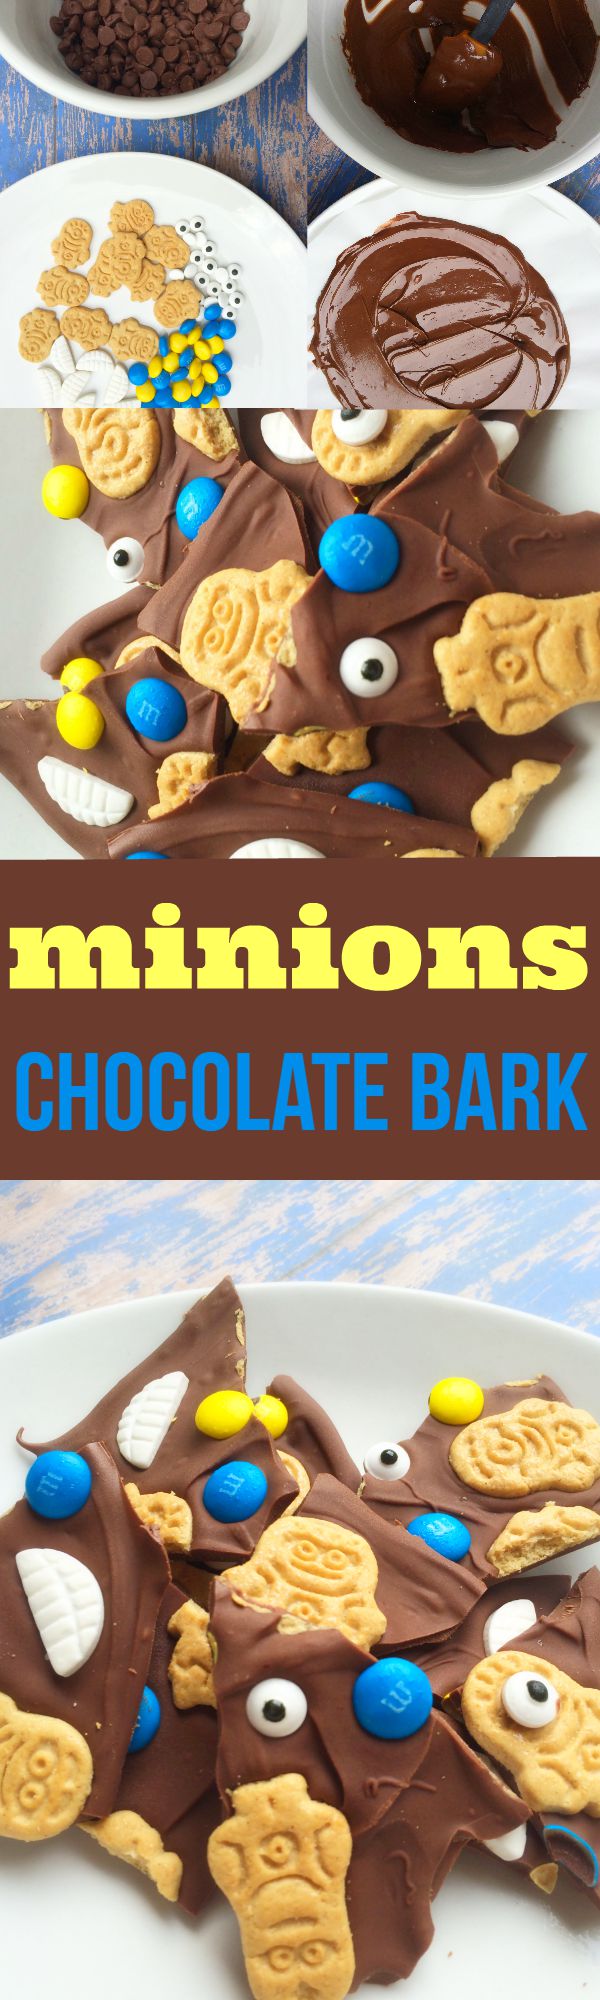 Minions Chocolate Bark Recipe - To get in the Minions spirit, we have put together this Minions inspired chocolate bark recipe.This makes a yummy treat that your kids will surely love!